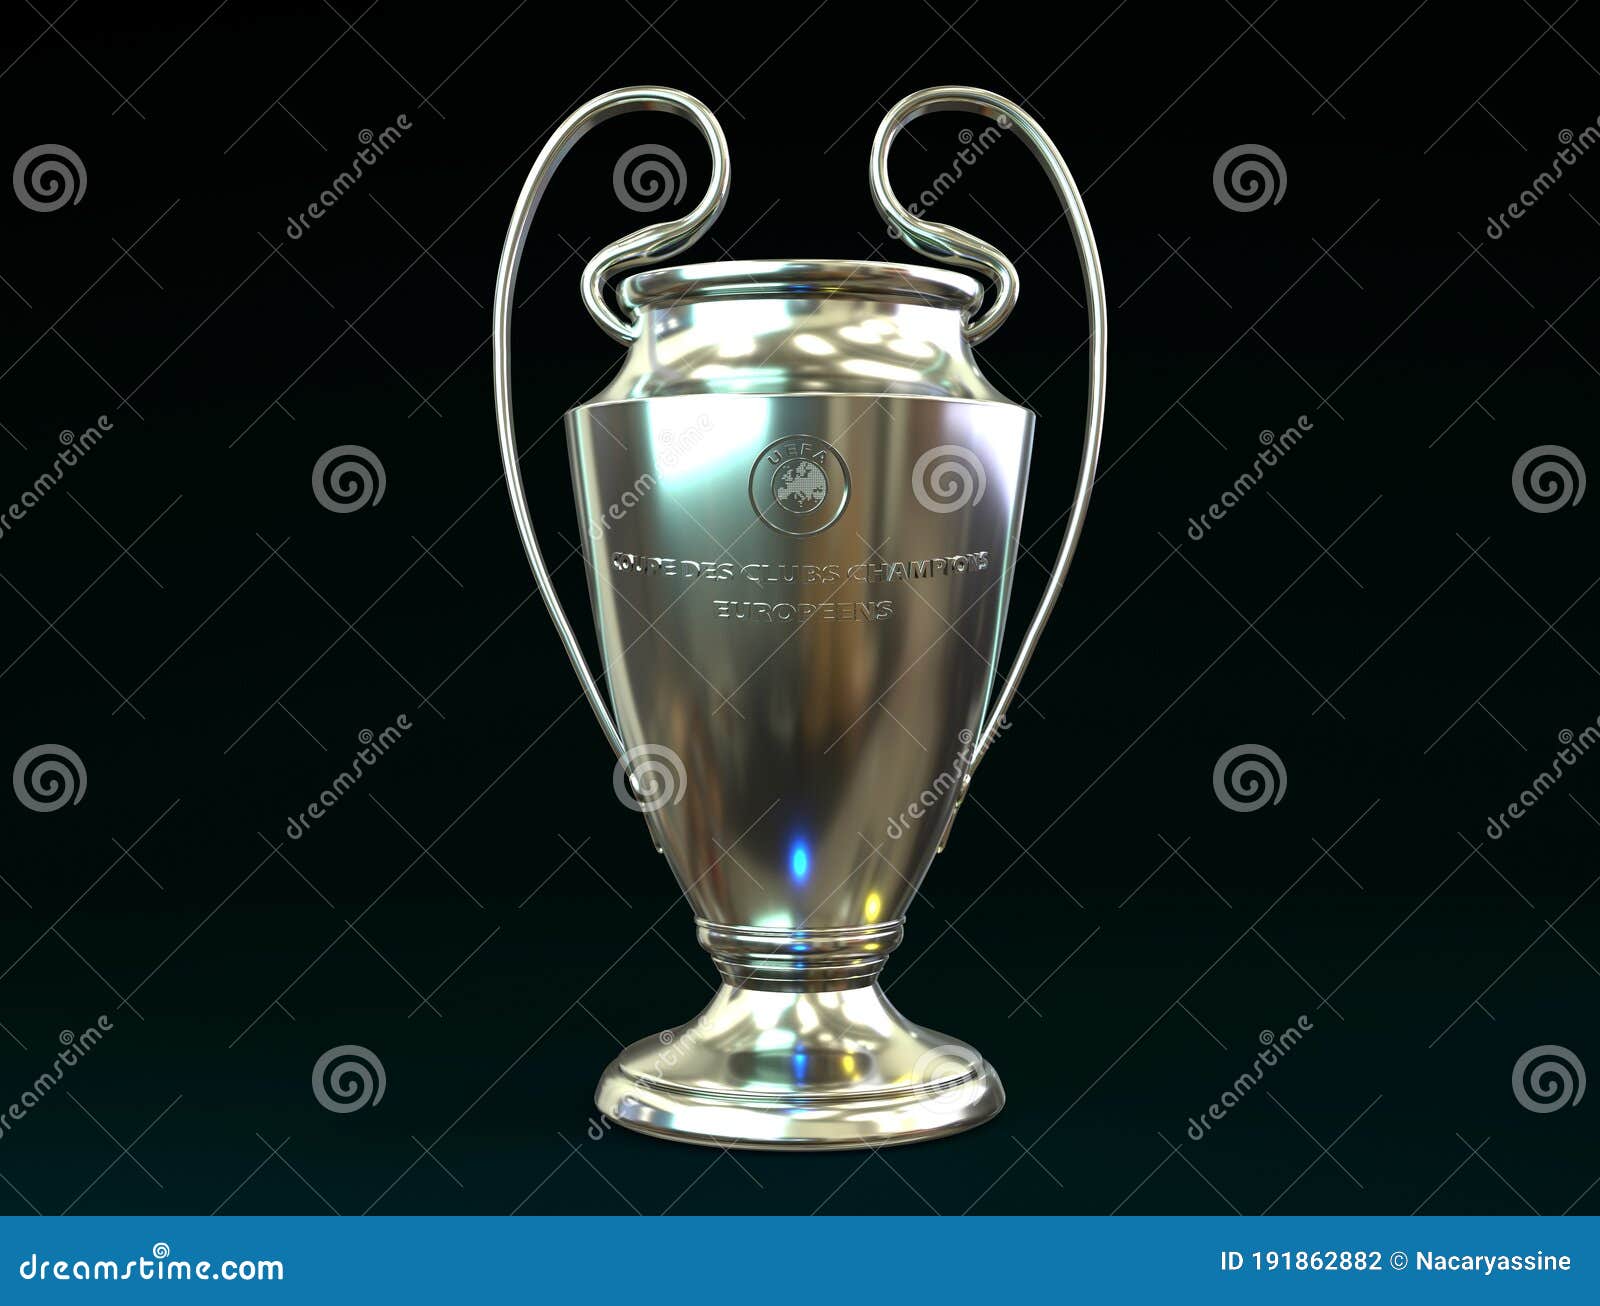 Champions League, Uefa, 3d Model Background Editorial Photography